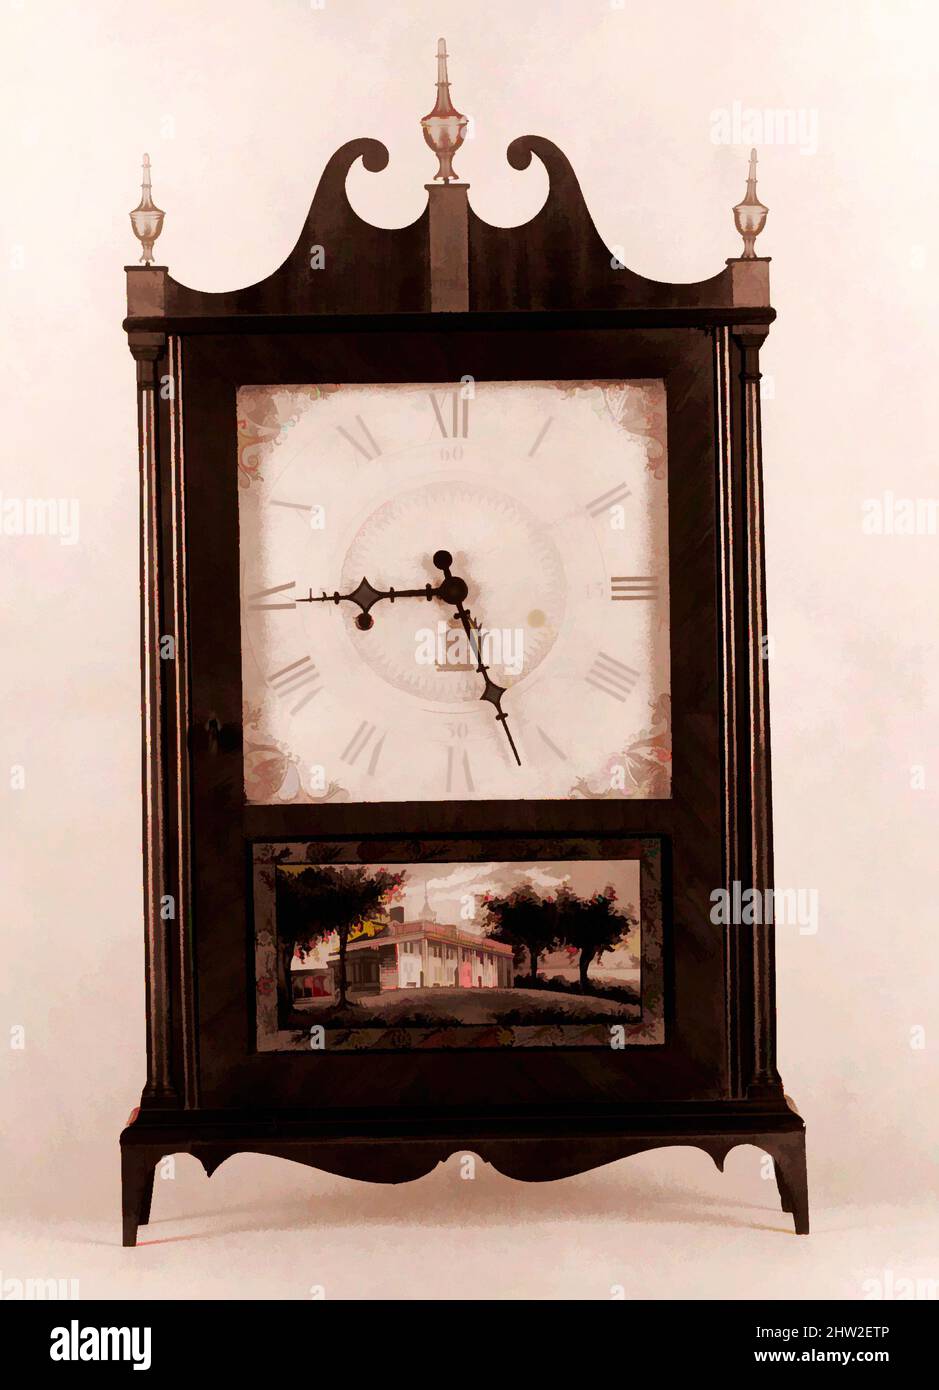 Art inspired by Shelf Clock, ca. 1820, Made in Plymouth, Connecticut, United States, American, Mahogany, maple, white pine, 27 7/8 x 15 3/4 x 3 3/4 in. (70.8 x 40 x 9.5 cm), Furniture, Seth Thomas (1785–1859, Classic works modernized by Artotop with a splash of modernity. Shapes, color and value, eye-catching visual impact on art. Emotions through freedom of artworks in a contemporary way. A timeless message pursuing a wildly creative new direction. Artists turning to the digital medium and creating the Artotop NFT Stock Photo